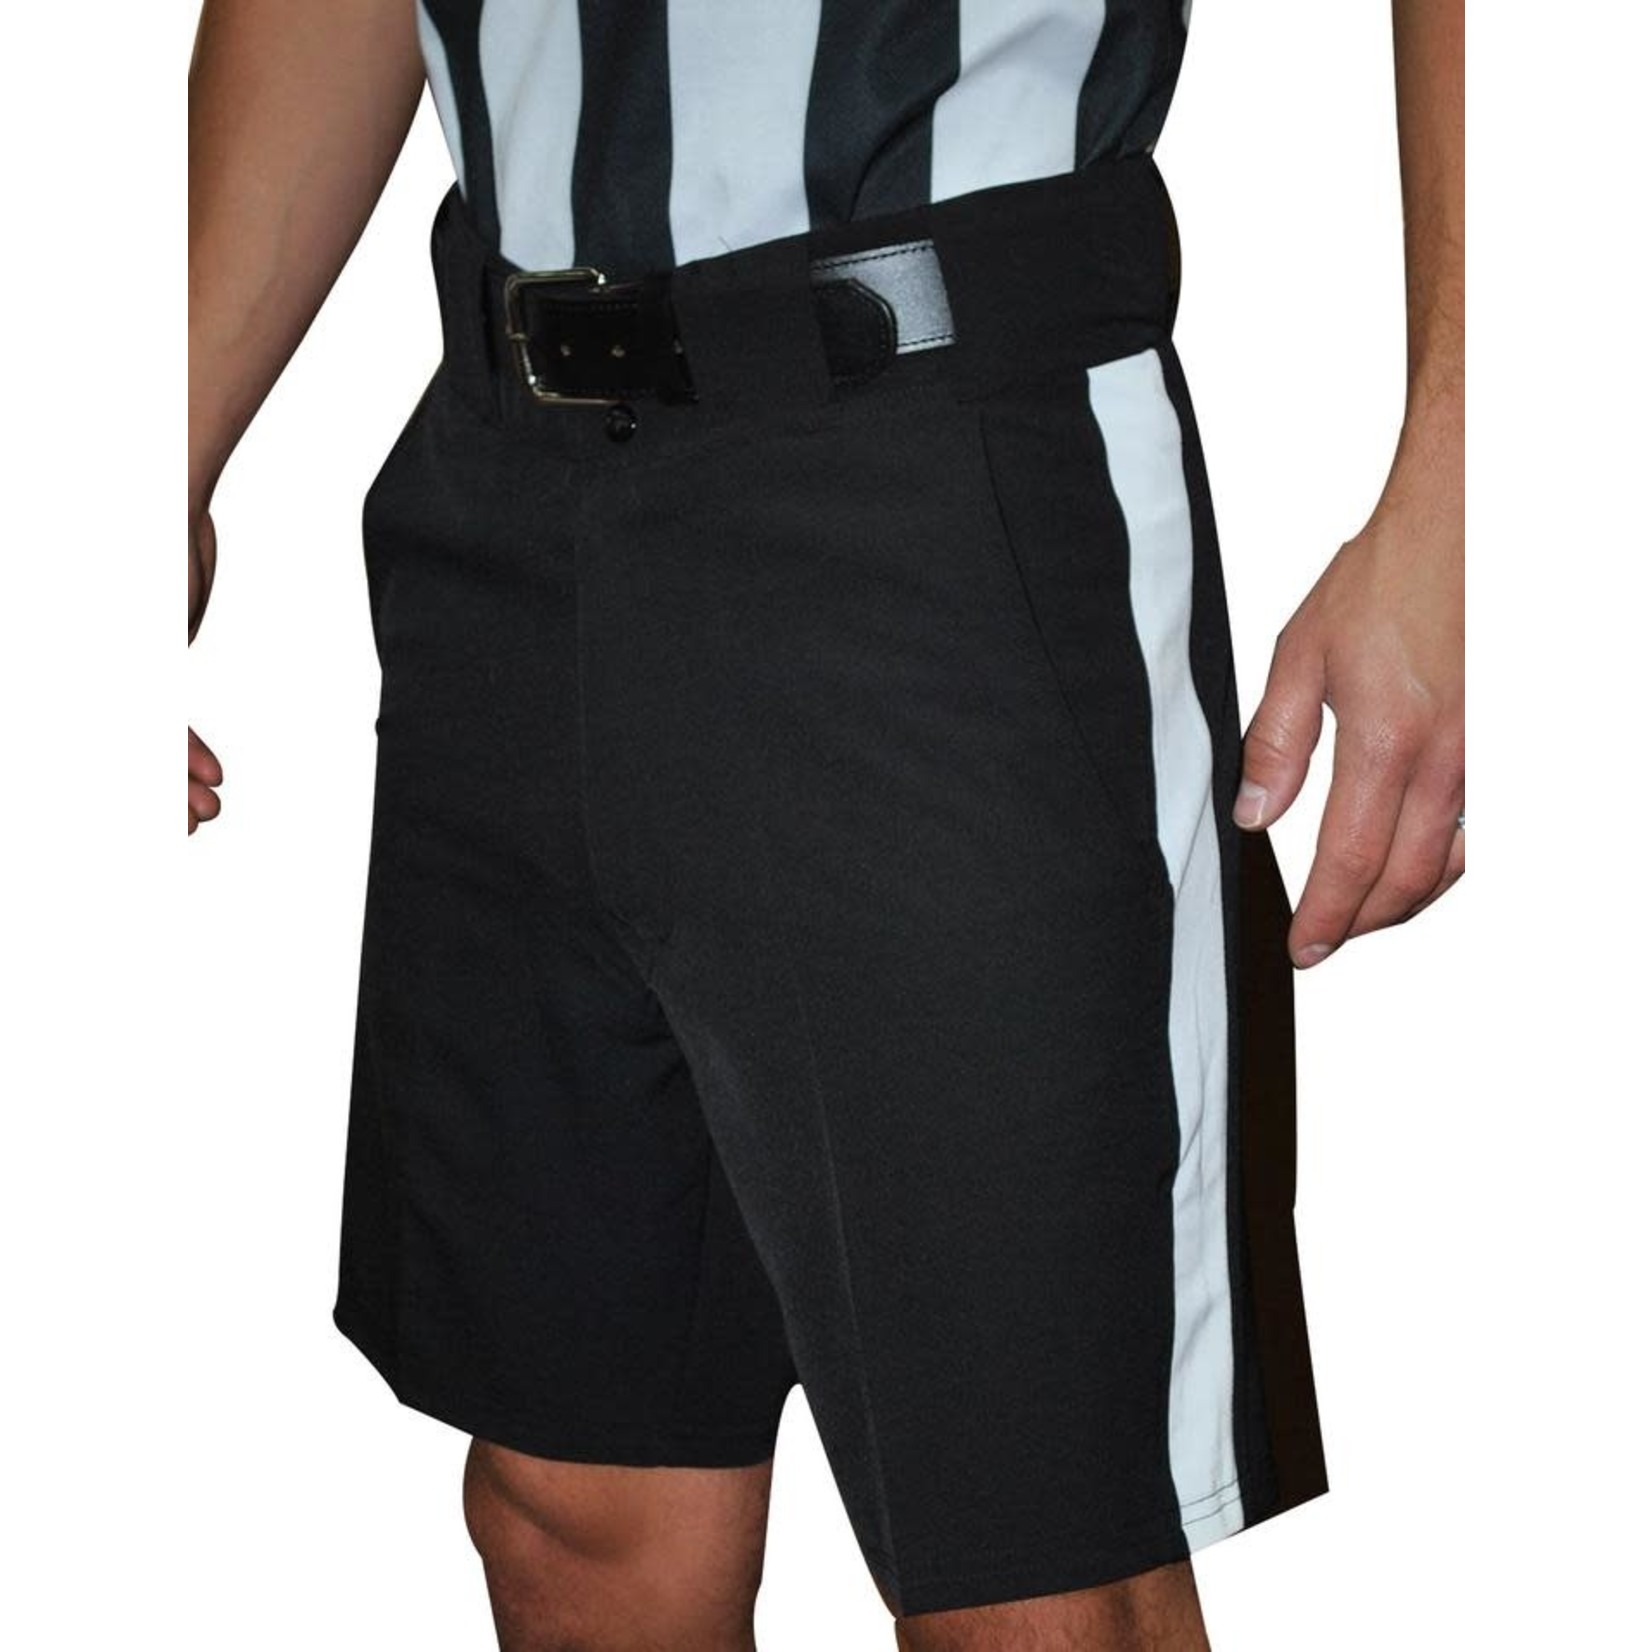 Smitty Smitty Football Officials Shorts Black with White Stripe